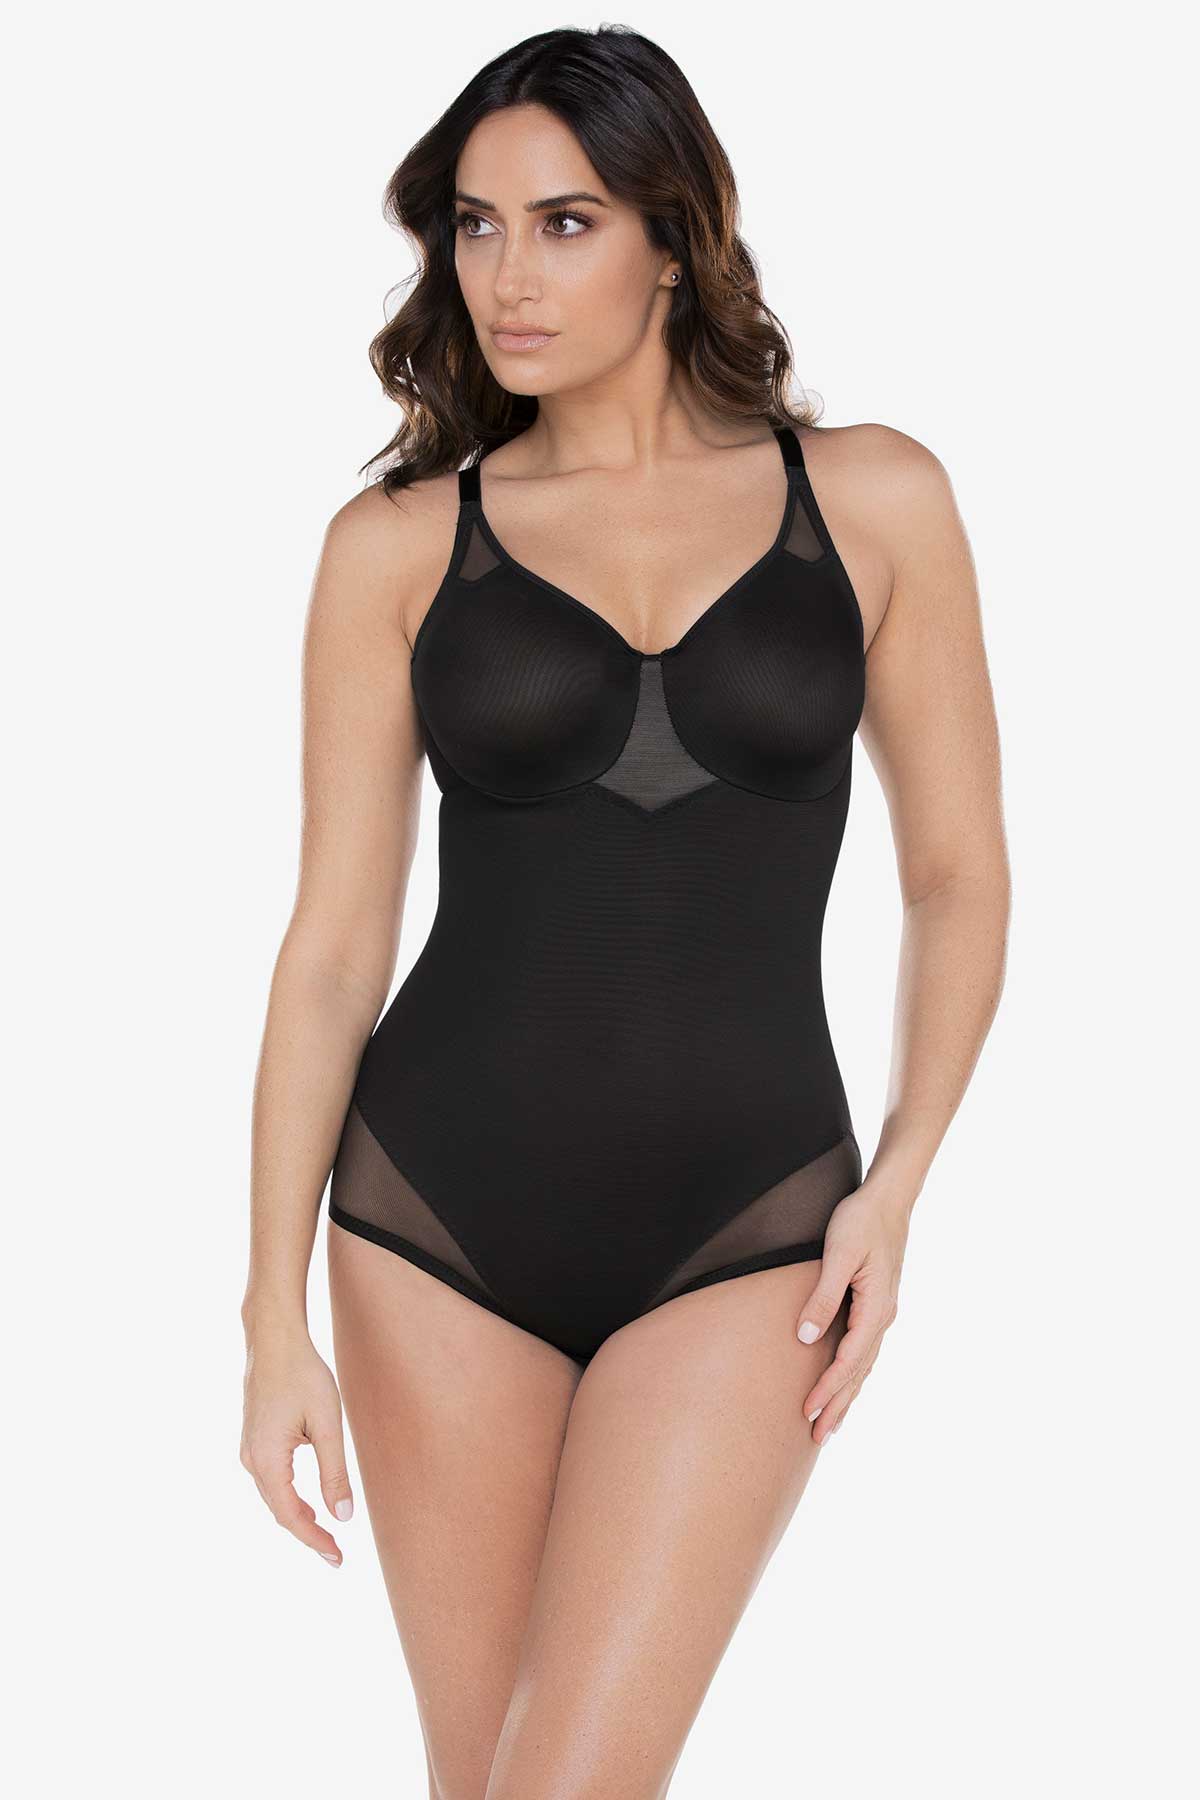 High quality miracle brands slim shaper bodysuit Size 16 Available